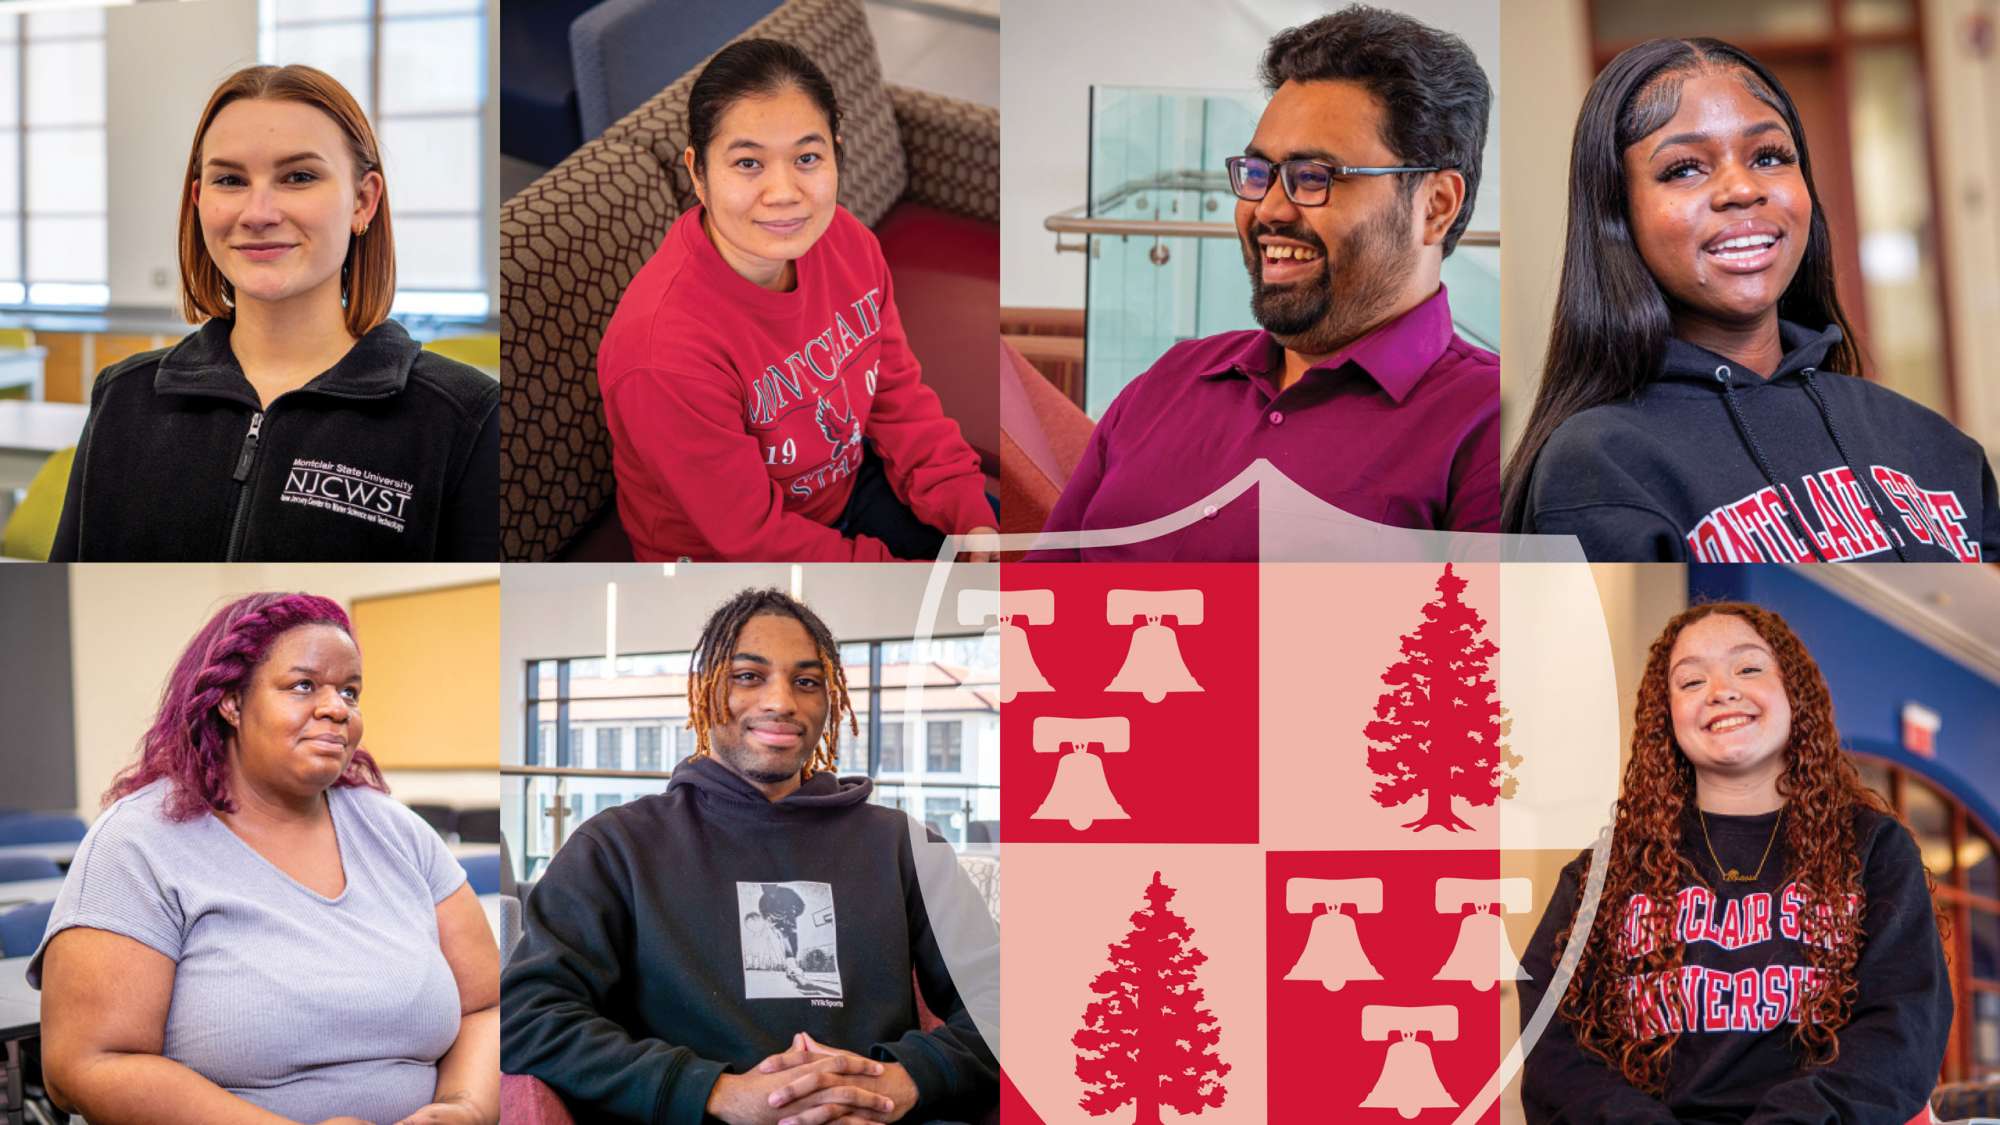 These undergraduate, master’s and doctoral students chose Montclair for the opportunities to make meaningful contributions to important matters in their fields. From left, top, Colleen Potocki, Phetlavanh Sinpaseuth, Nurul Kadir and Jennifer Asamoah. Bottom row, from left, Krystle Davis, Maurice Jenkins and Melissa De Almeida. 